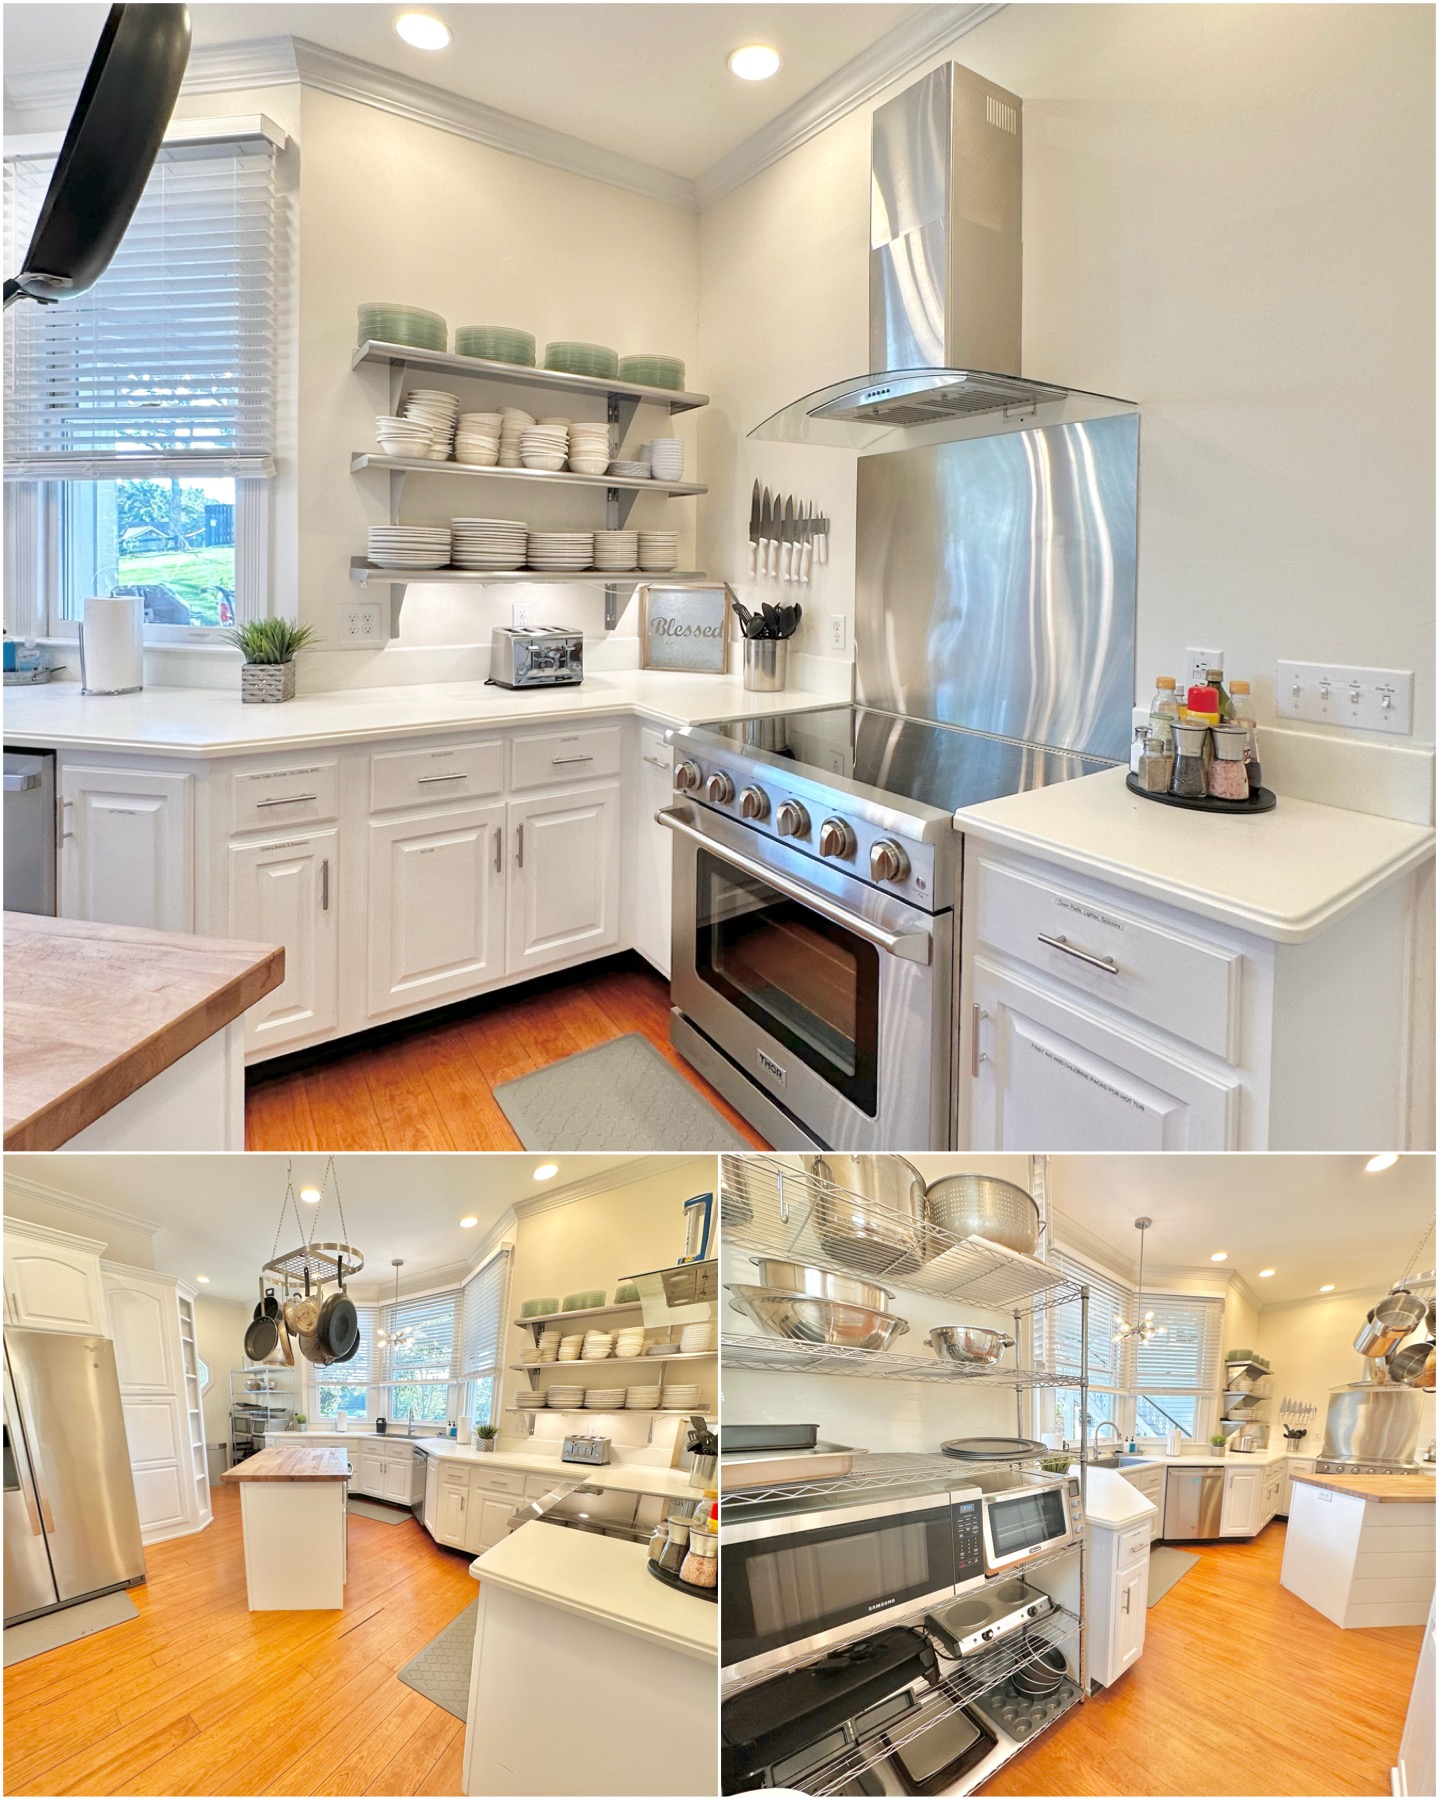 Large kitchen with plenty of counter space, pots, pans, utensils, 2 dish washers, etc. TONS provided! Ask us for our stocked list!